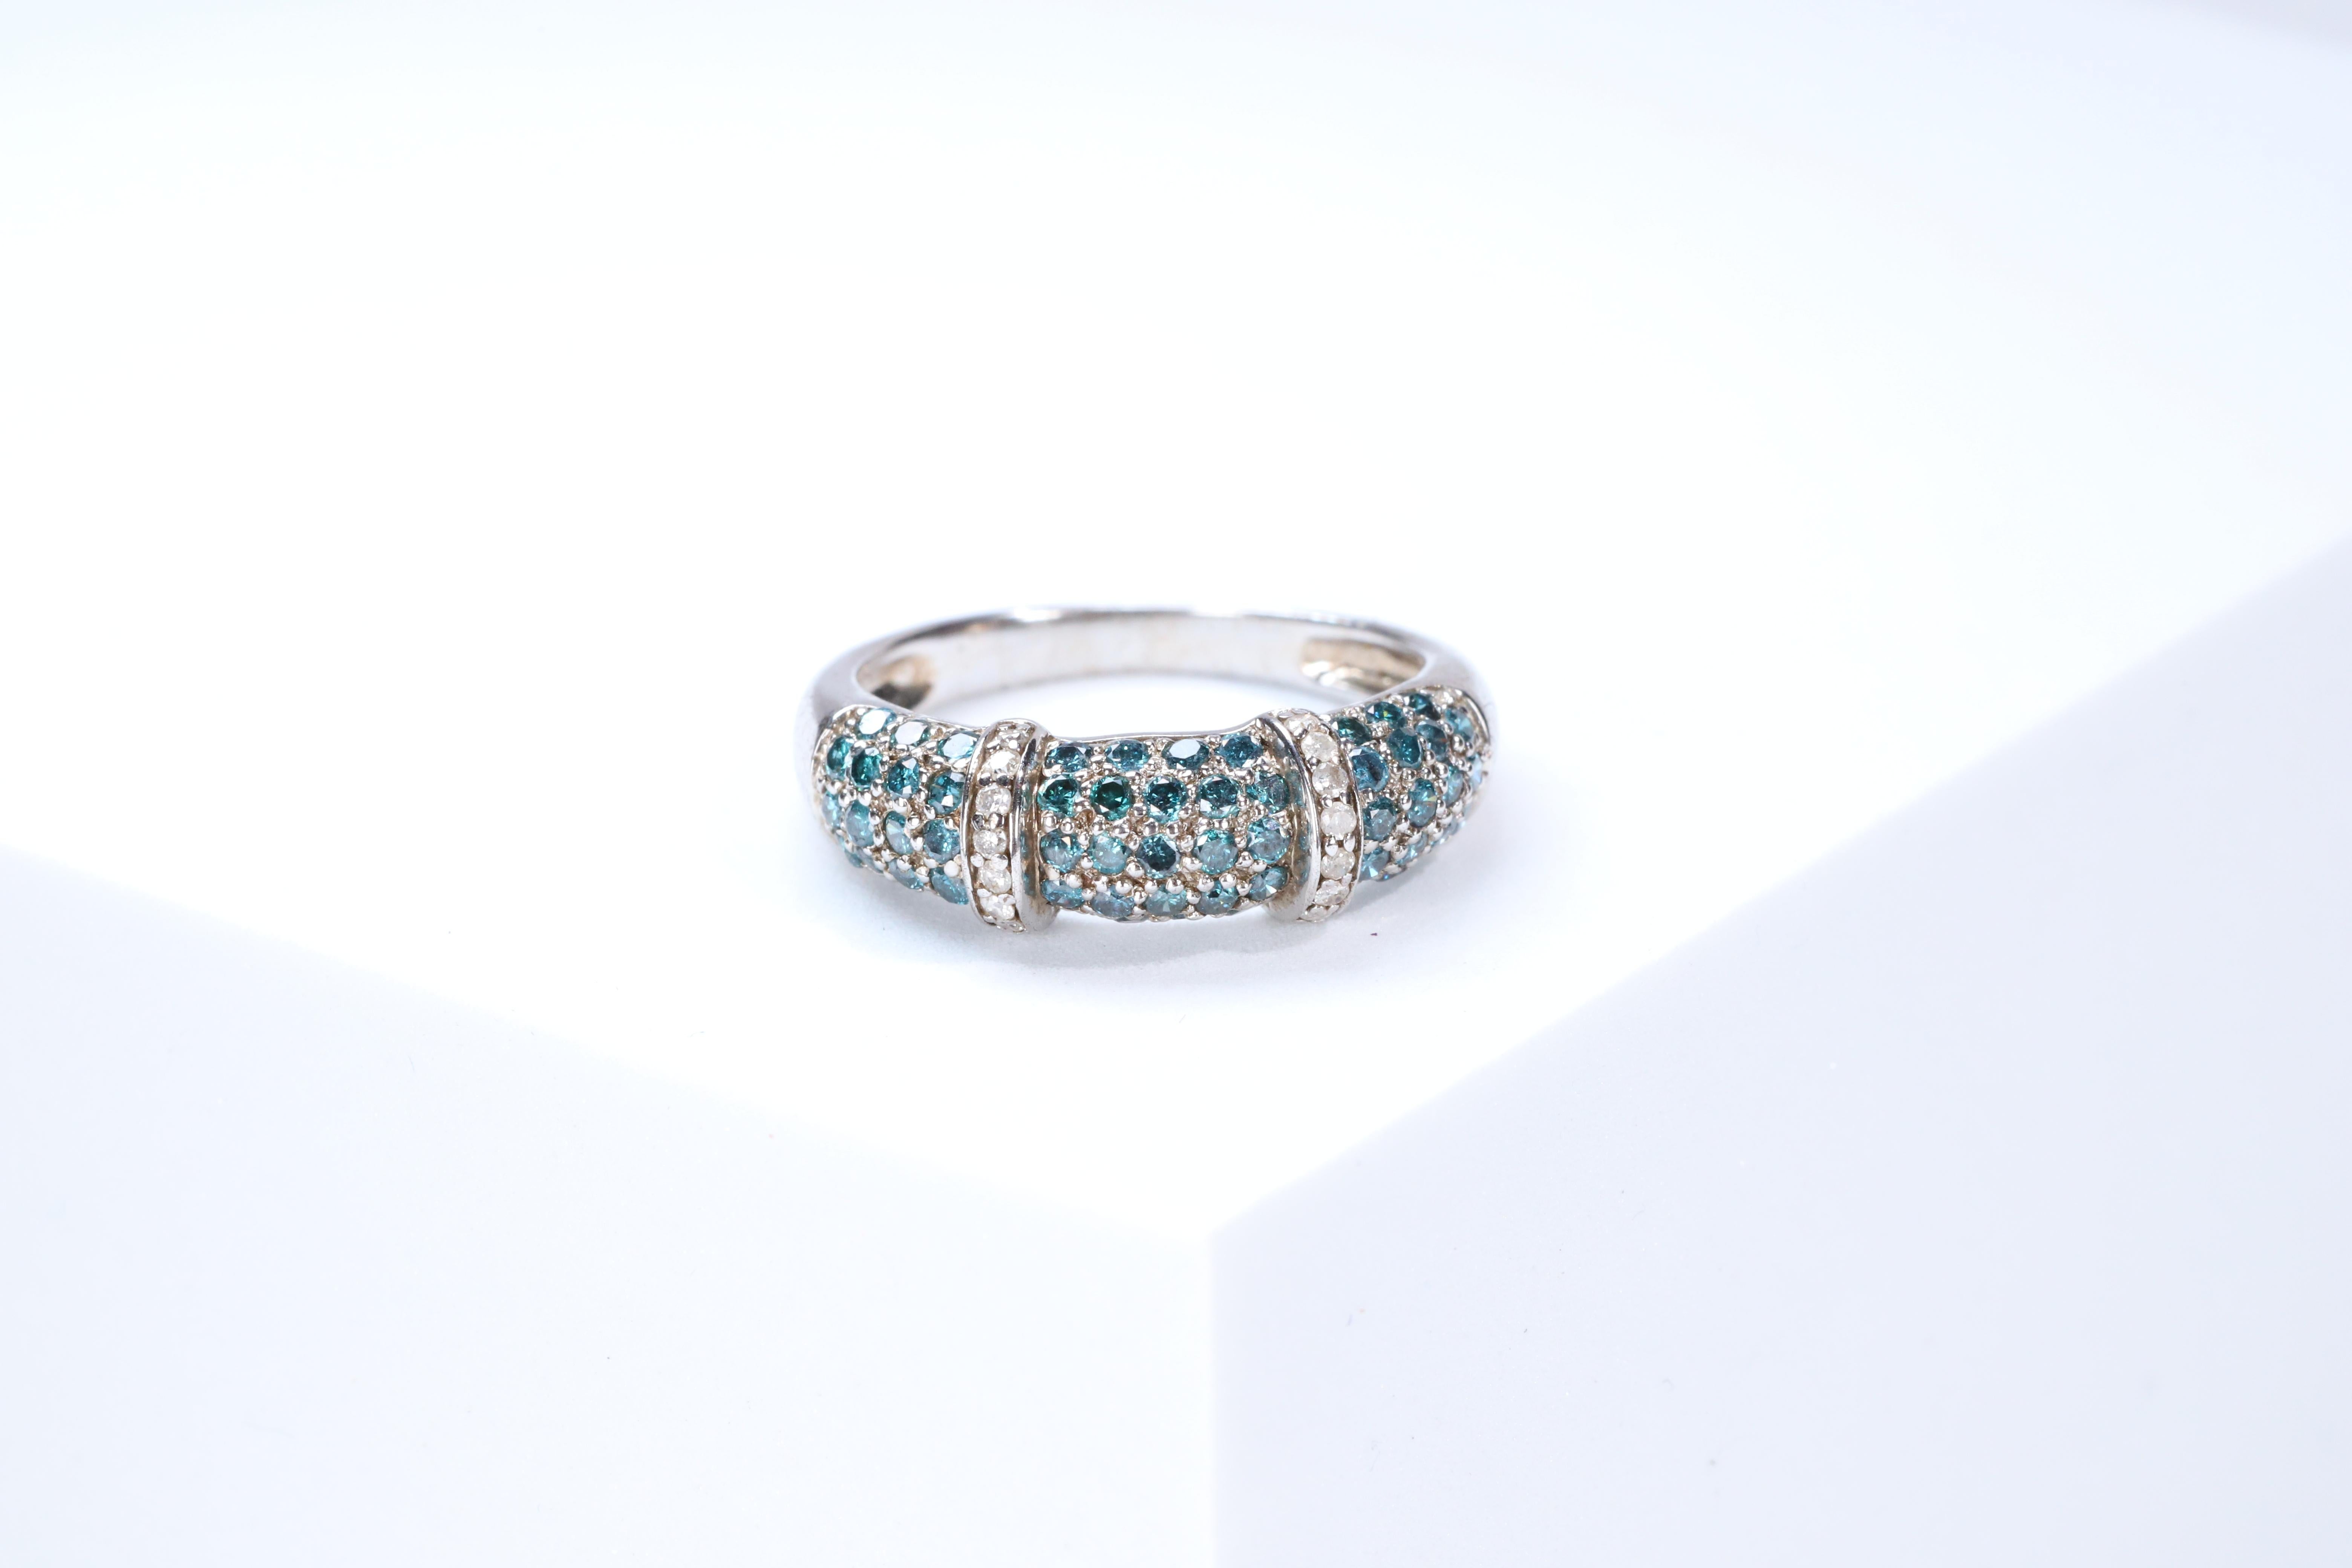 Stunning, timeless and classy eternity Unique Ring. Decorate yourself in luxury with this Gin & Grace Ring. The 925 Sterling Silver jewelry boasts with Natural Round-cut white Diamond (16 Pcs) 0.10 Carat, Blue Diamond (59 pcs) 0.82 carat accent